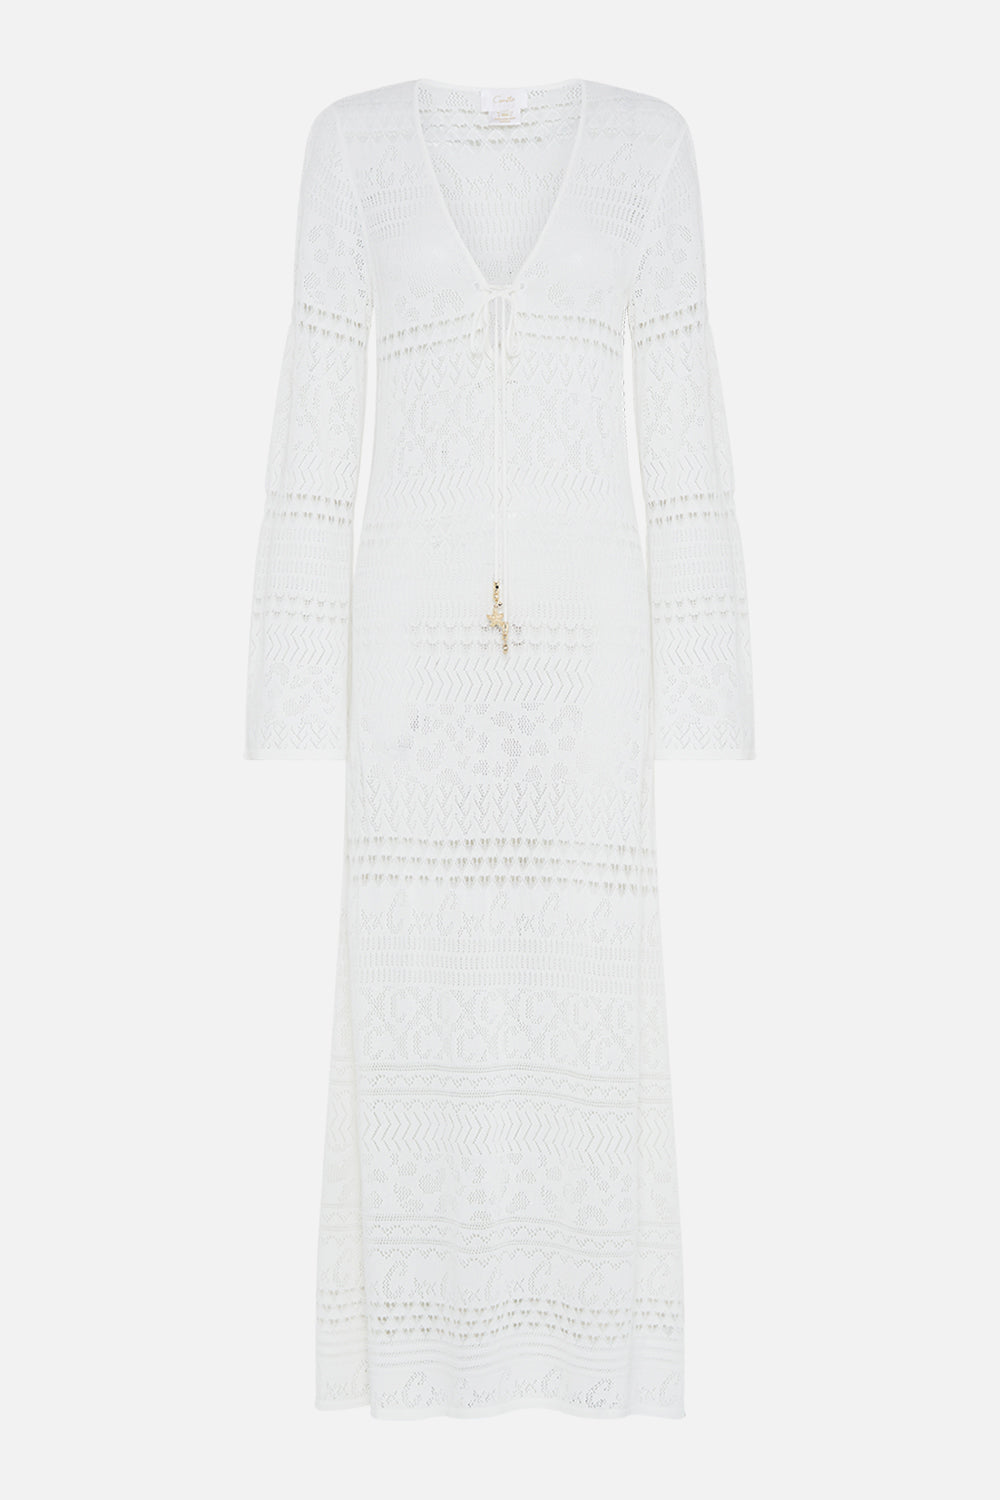 Product view of CAMILLA pointelle knit dress in Sea Charm 